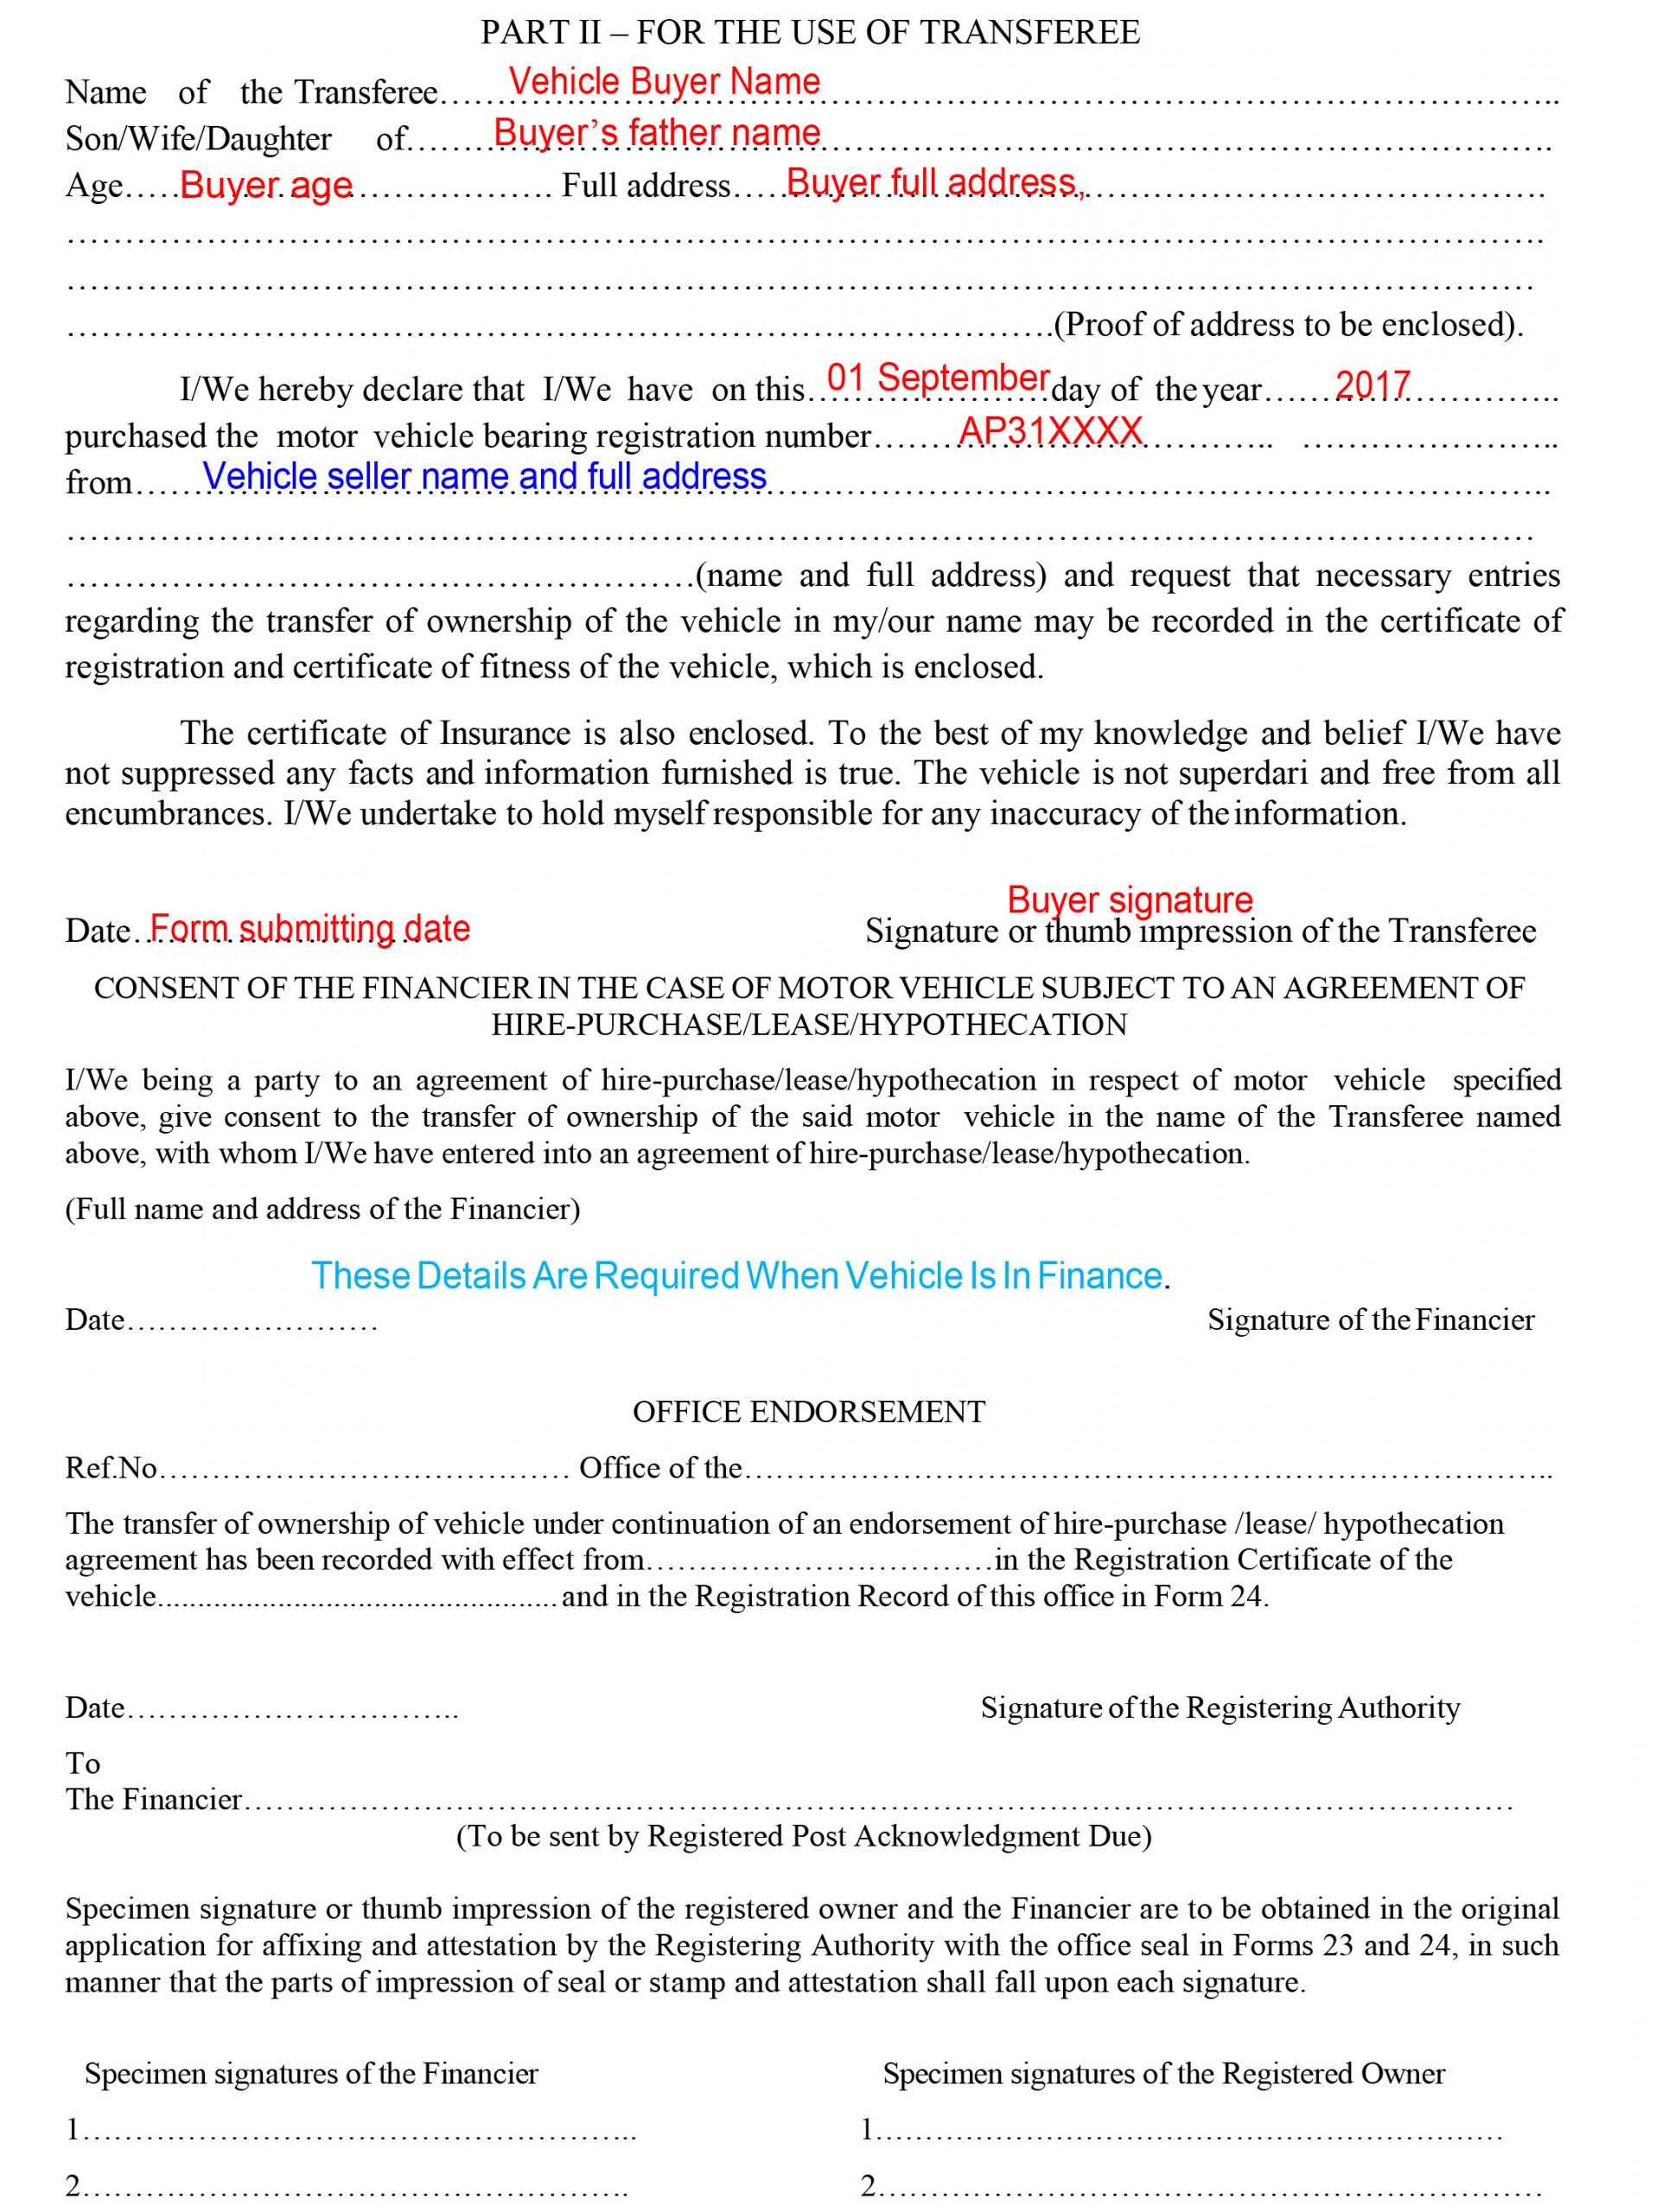 filed rto form 30 part2